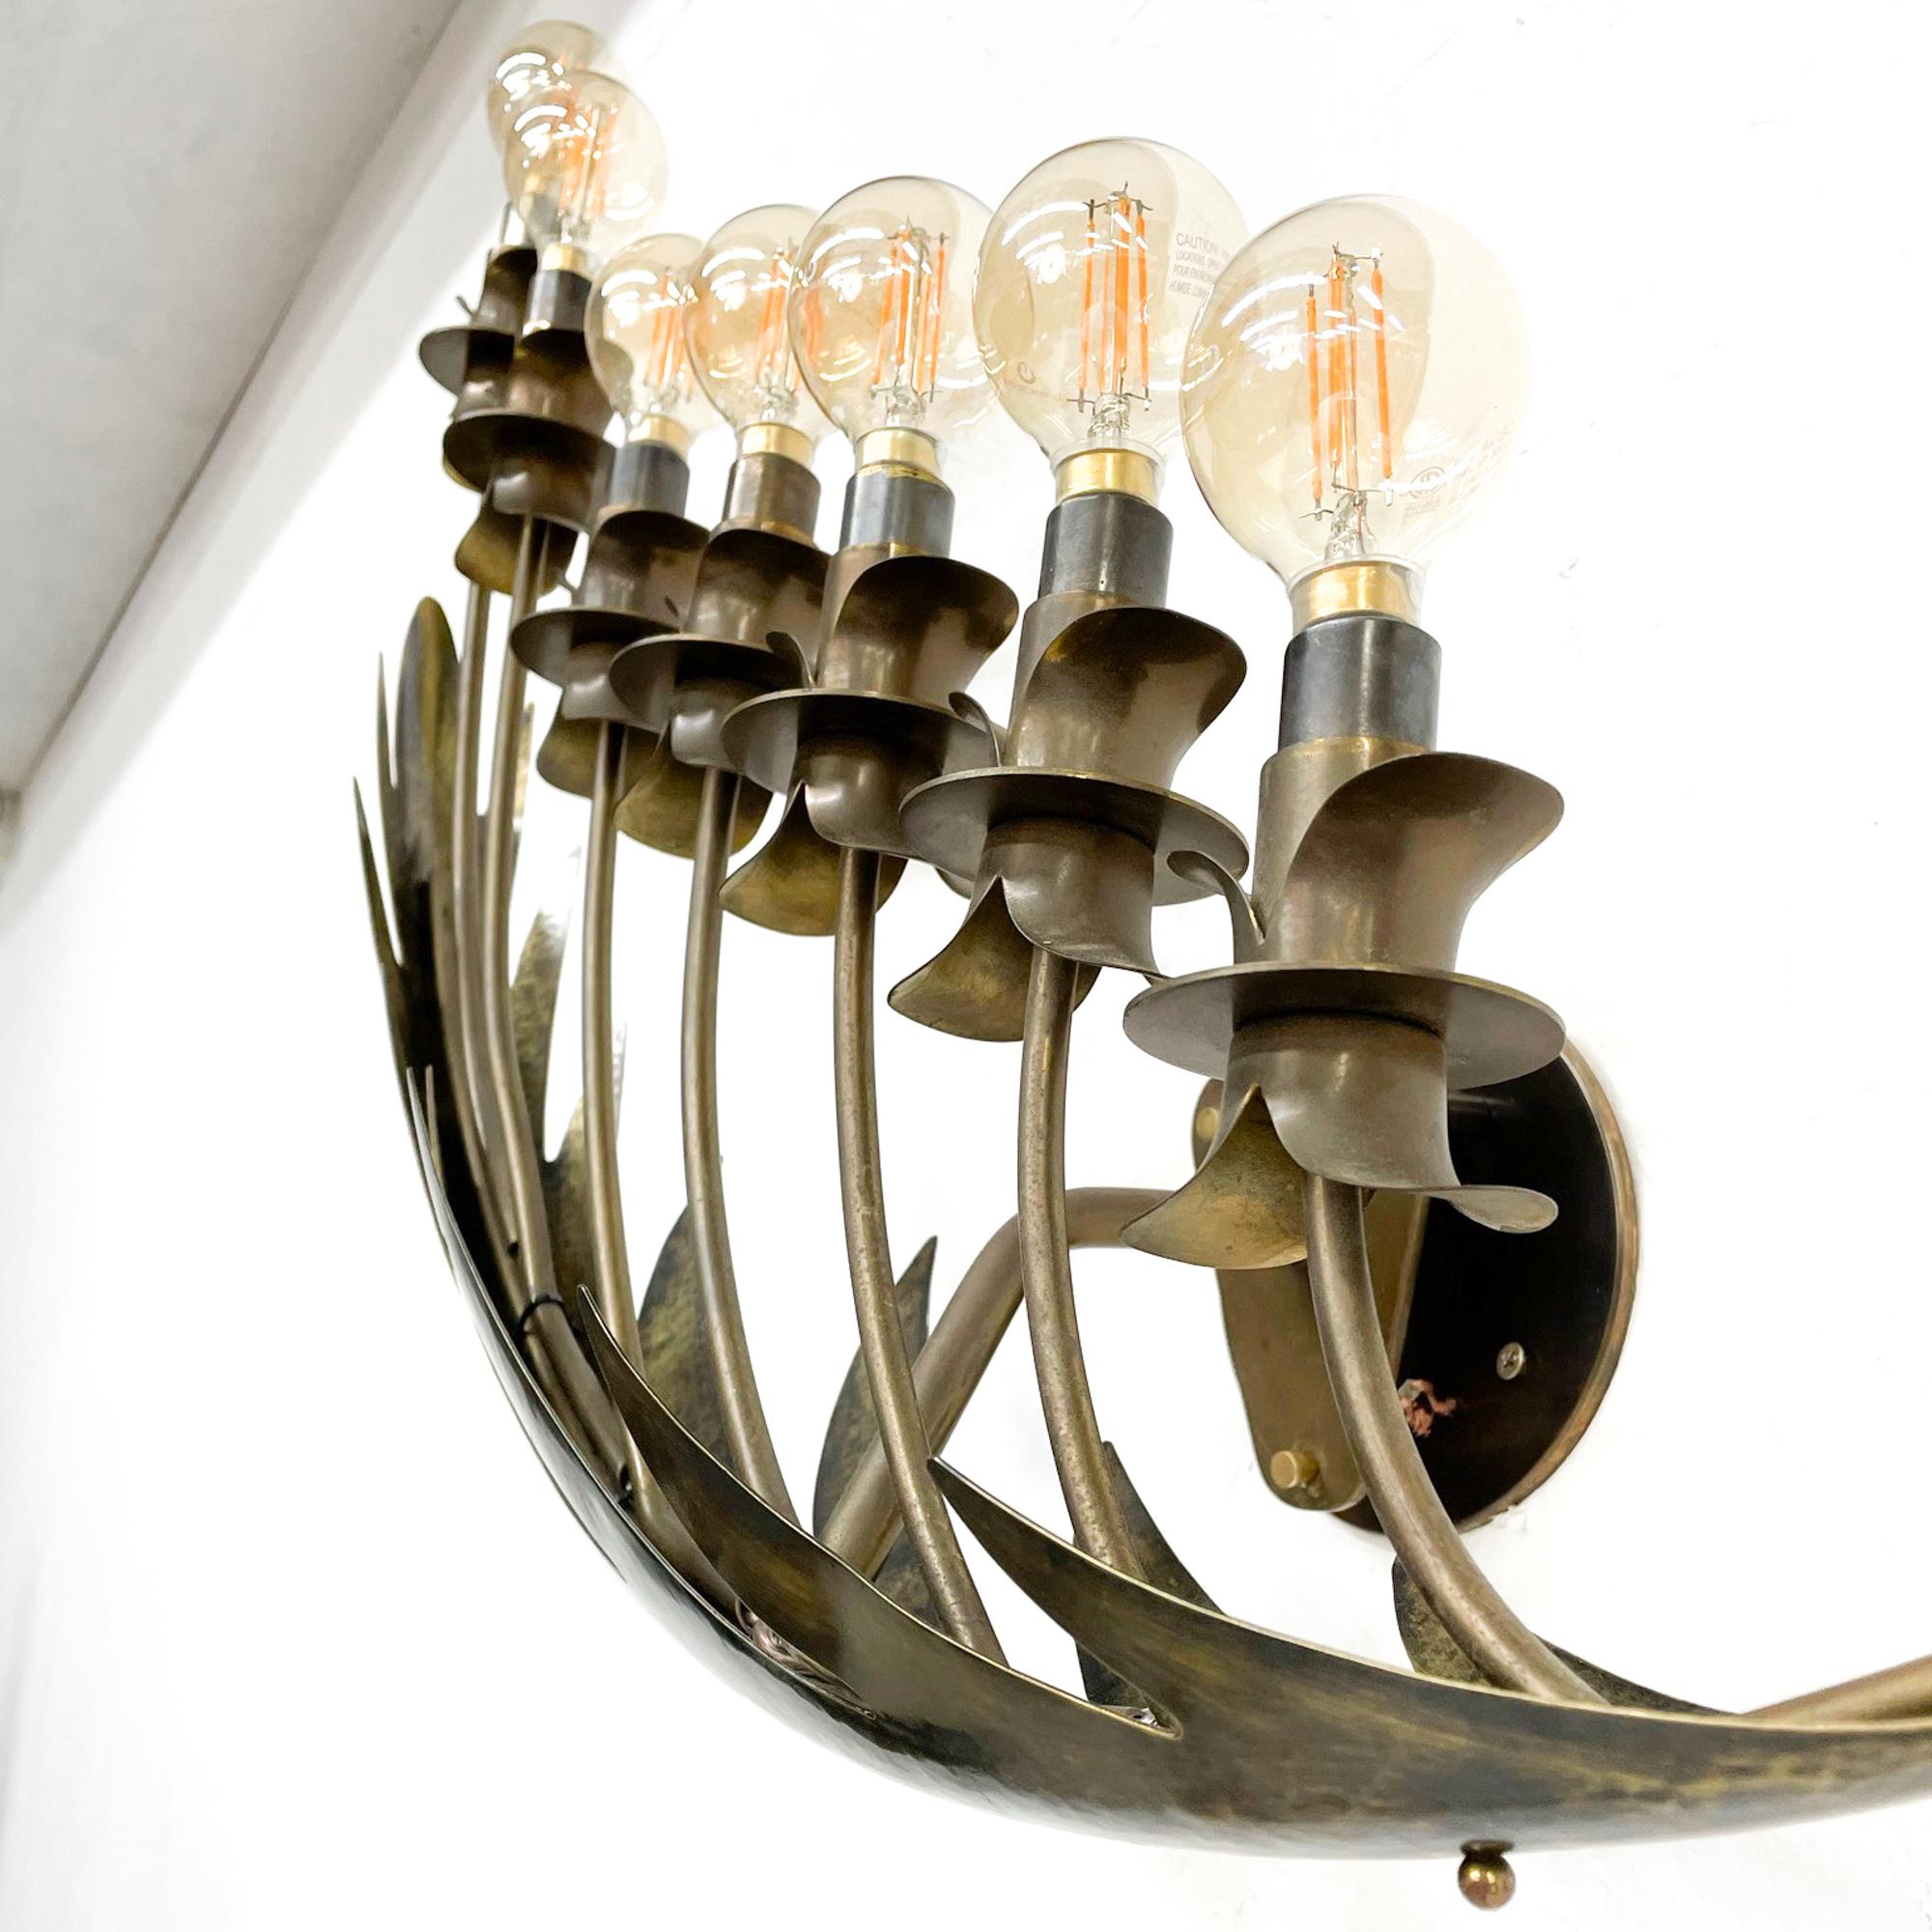 1950s Stilnovo Wall Sconce Seven Arm Lamp Brass Italy For Sale 3